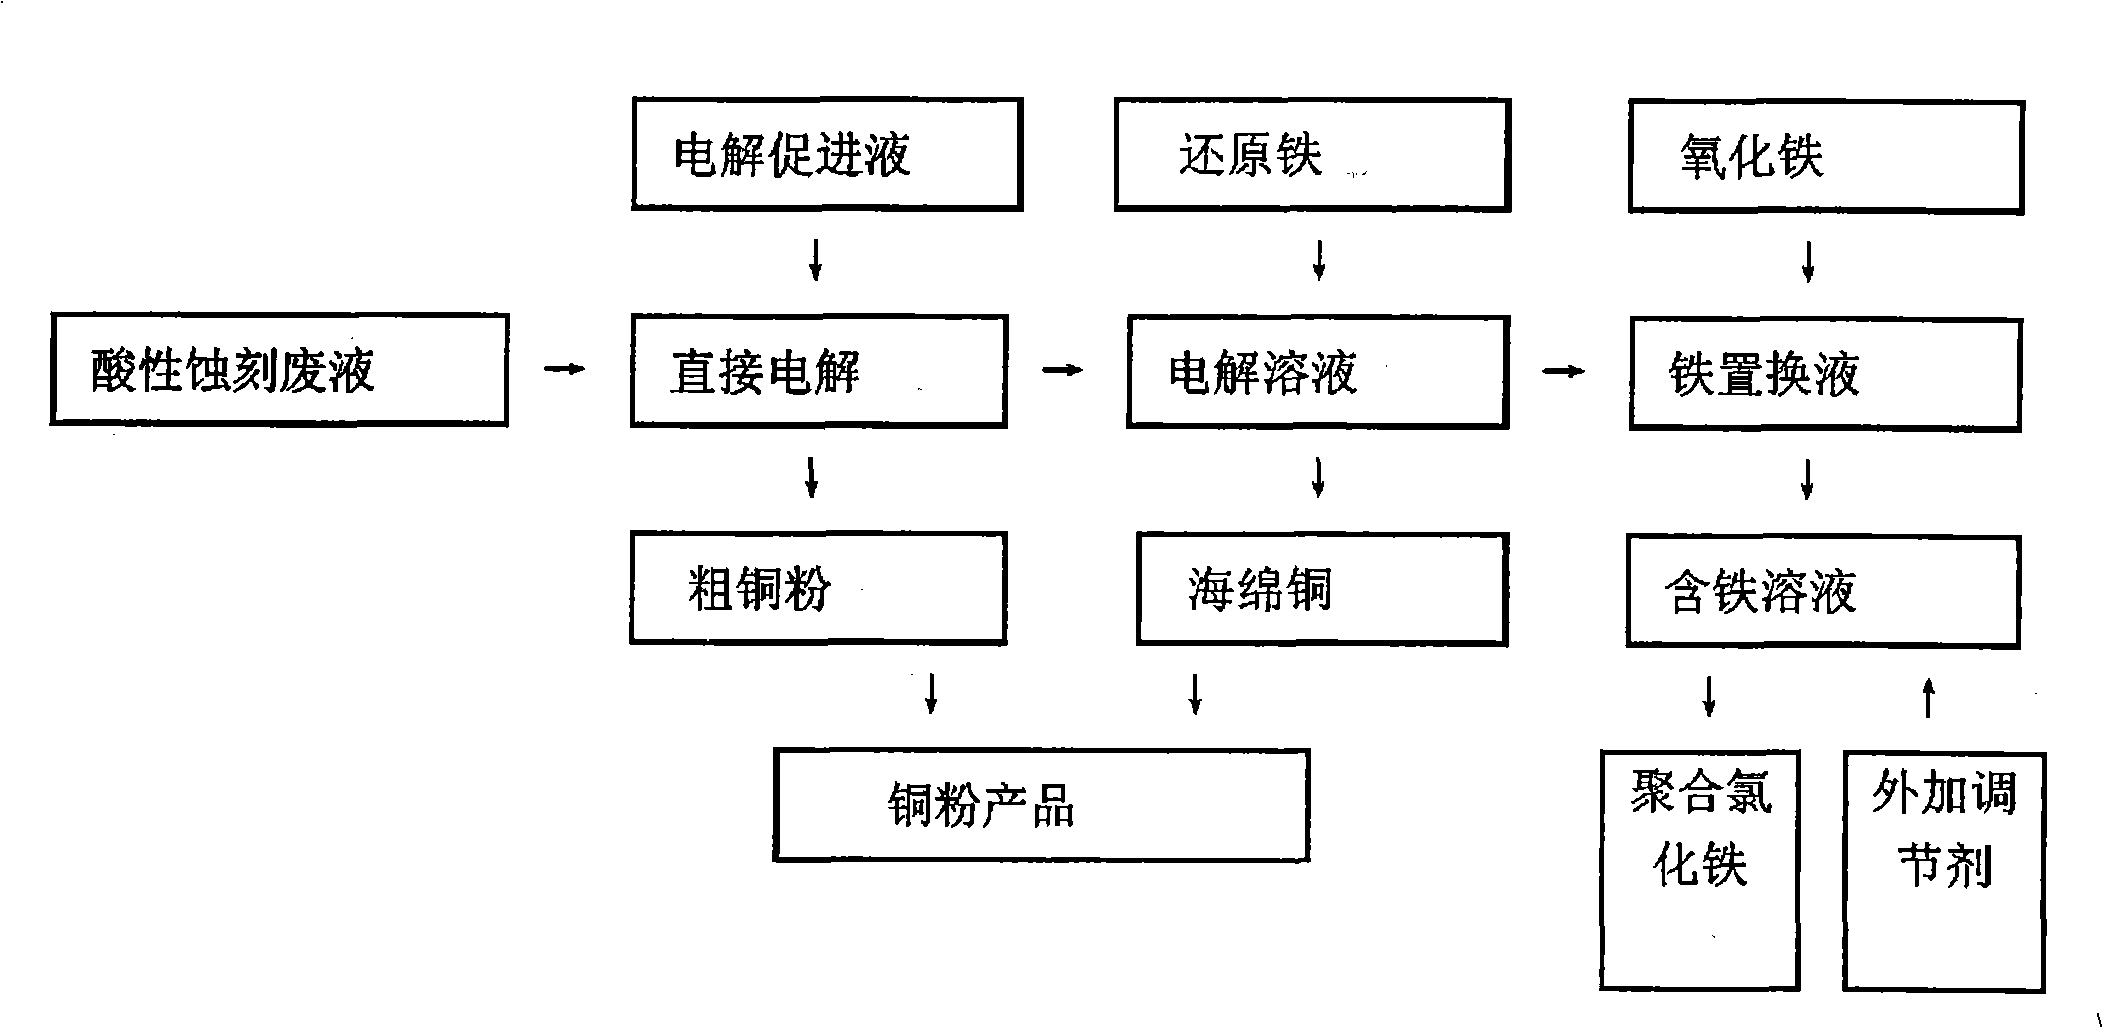 Method for extracting copper from printed circuit board acidic spent etching solution and preparing poly ferric chloride